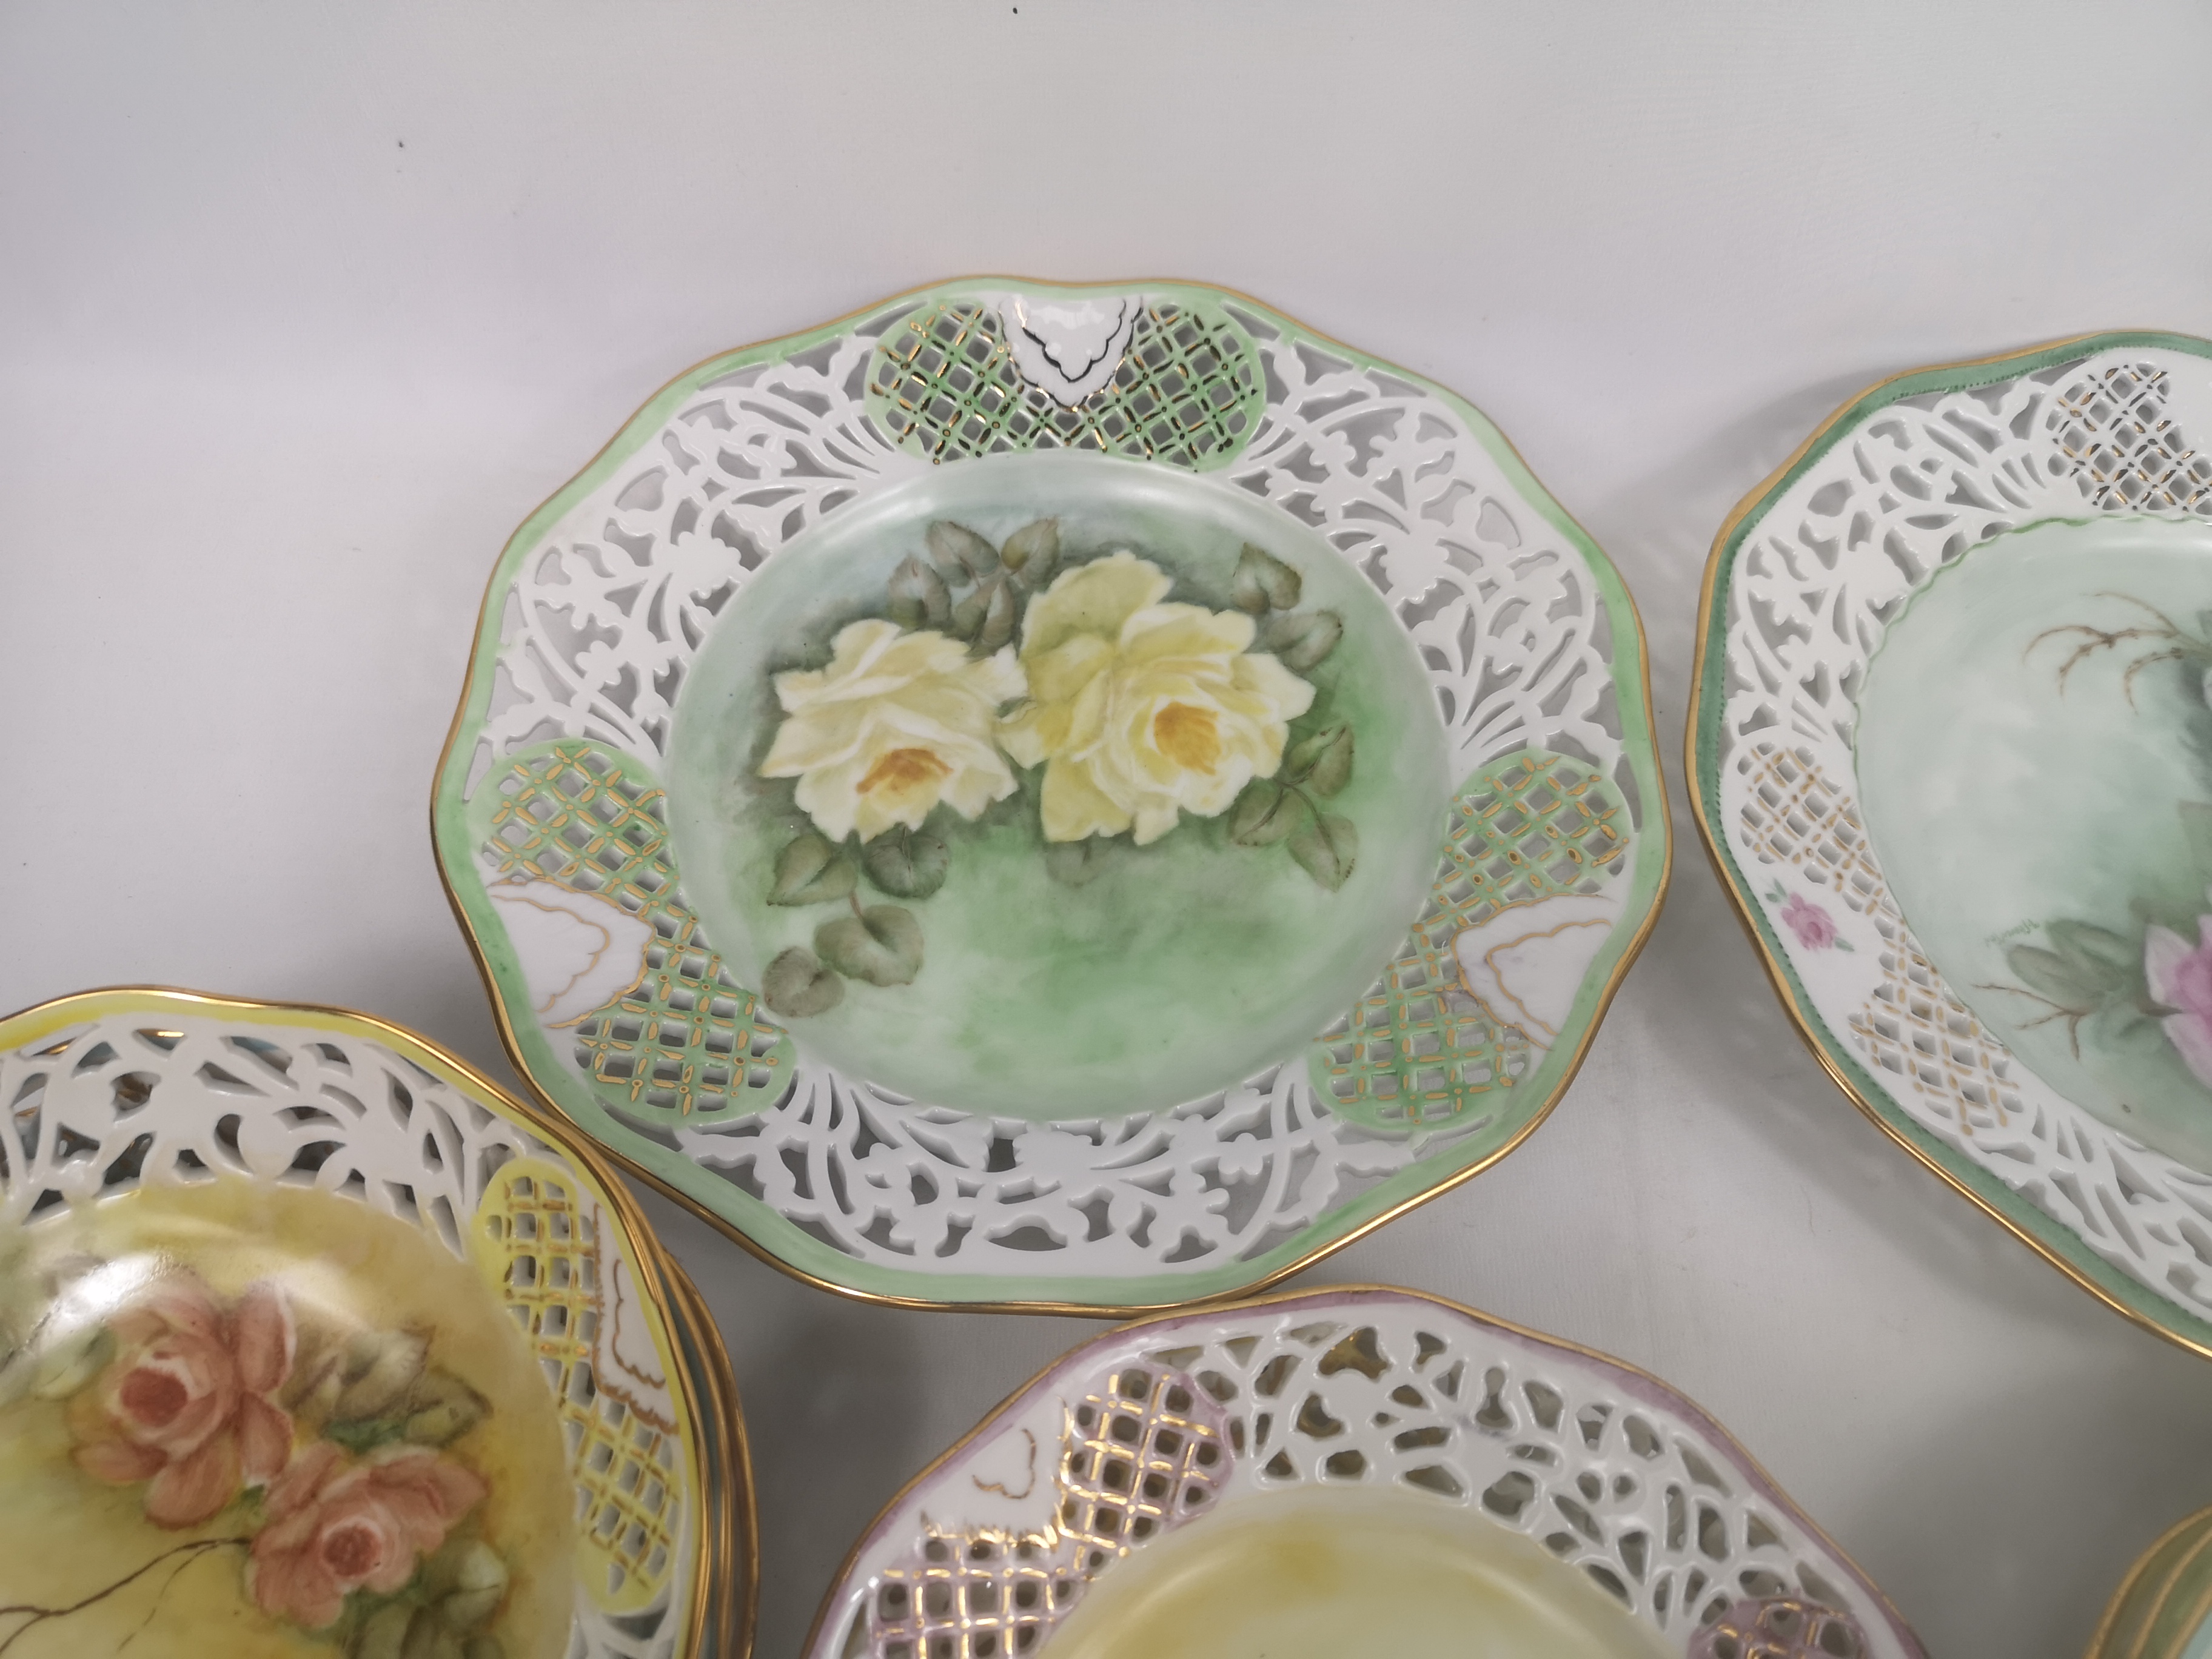 Quantity of hand painted plates and bowls by Marjorie Stevenson - Image 2 of 8